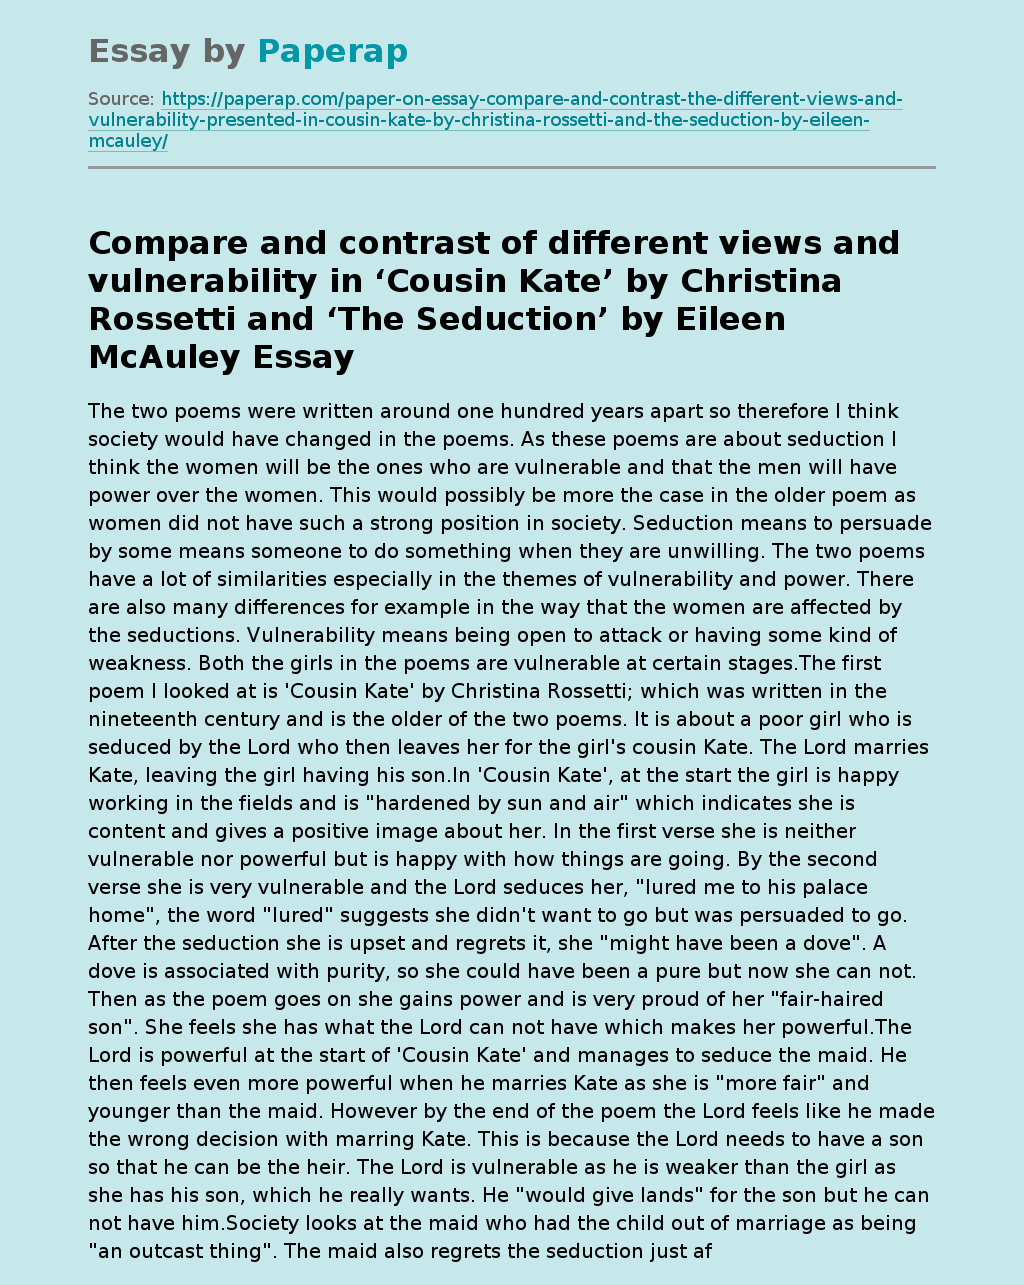 Compare and contrast of different views and vulnerability in ‘Cousin Kate’ by Christina Rossetti and ‘The Seduction’ by Eileen McAuley